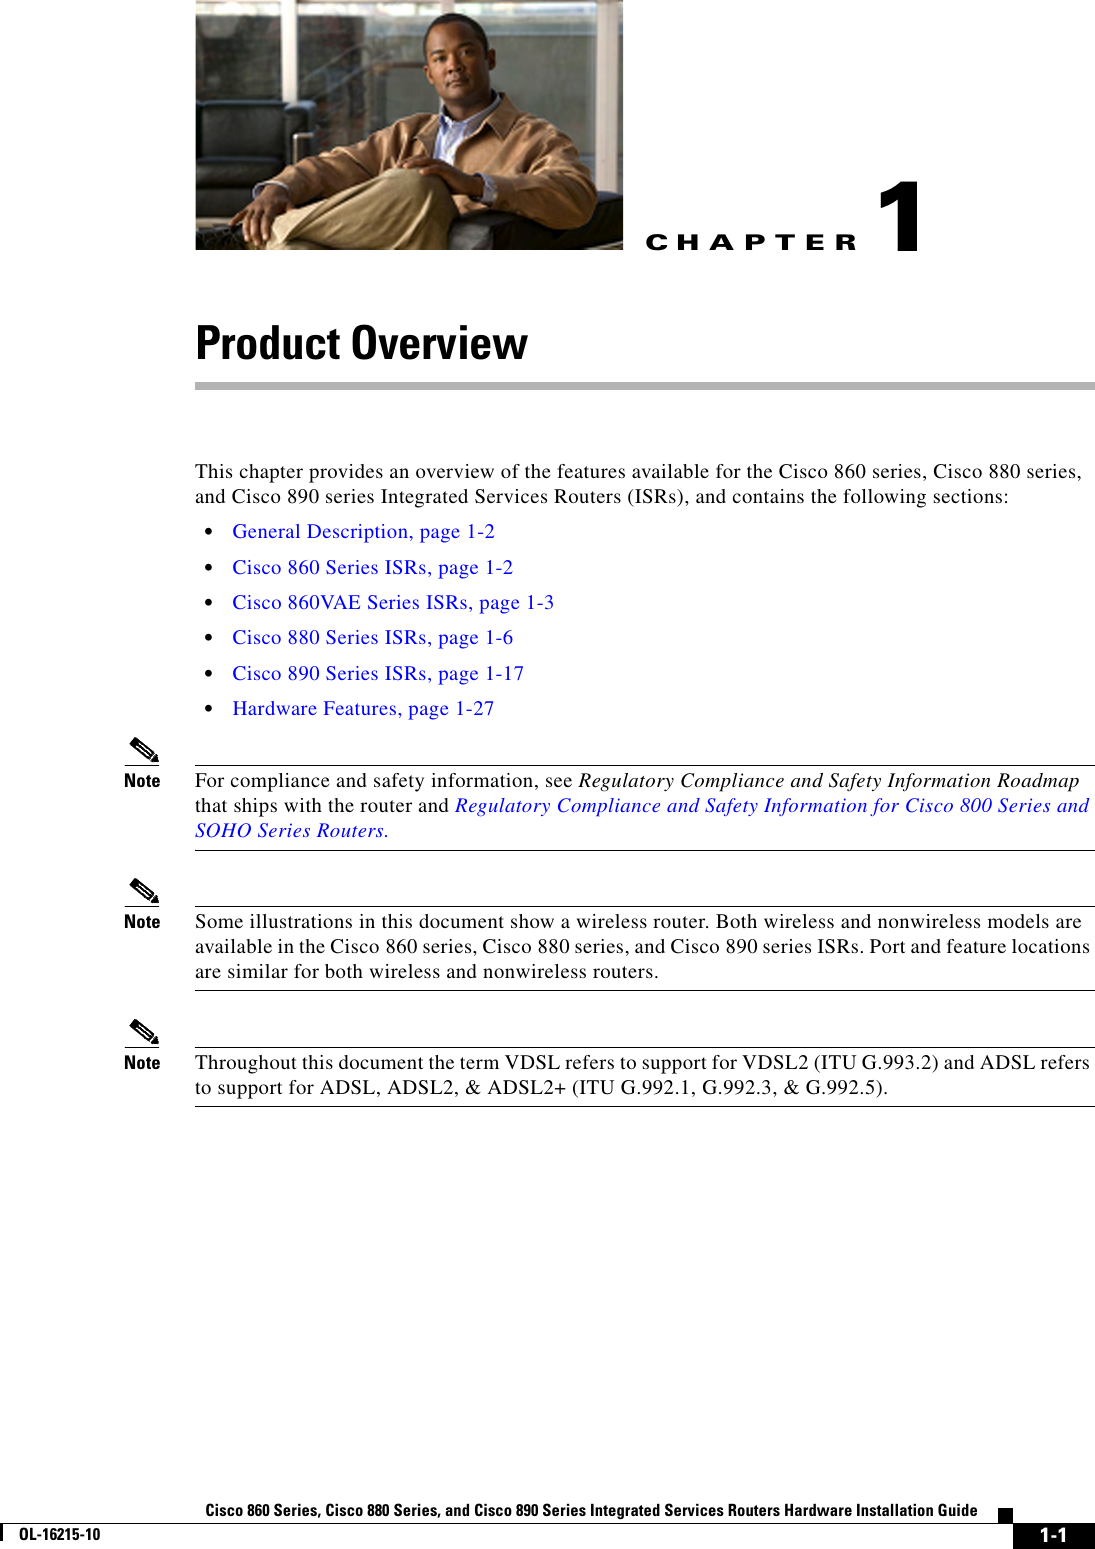 CHAPTER 1-1Cisco 860 Series, Cisco 880 Series, and Cisco 890 Series Integrated Services Routers Hardware Installation GuideOL-16215-101Product OverviewThis chapter provides an overview of the features available for the Cisco 860 series, Cisco 880 series, and Cisco 890 series Integrated Services Routers (ISRs), and contains the following sections:  • General Description, page 1-2  • Cisco 860 Series ISRs, page 1-2  • Cisco 860VAE Series ISRs, page 1-3  • Cisco 880 Series ISRs, page 1-6  • Cisco 890 Series ISRs, page 1-17  • Hardware Features, page 1-27Note For compliance and safety information, see Regulatory Compliance and Safety Information Roadmap that ships with the router and Regulatory Compliance and Safety Information for Cisco 800 Series and SOHO Series Routers.Note Some illustrations in this document show a wireless router. Both wireless and nonwireless models are available in the Cisco 860 series, Cisco 880 series, and Cisco 890 series ISRs. Port and feature locations are similar for both wireless and nonwireless routers.Note Throughout this document the term VDSL refers to support for VDSL2 (ITU G.993.2) and ADSL refers to support for ADSL, ADSL2, &amp; ADSL2+ (ITU G.992.1, G.992.3, &amp; G.992.5).